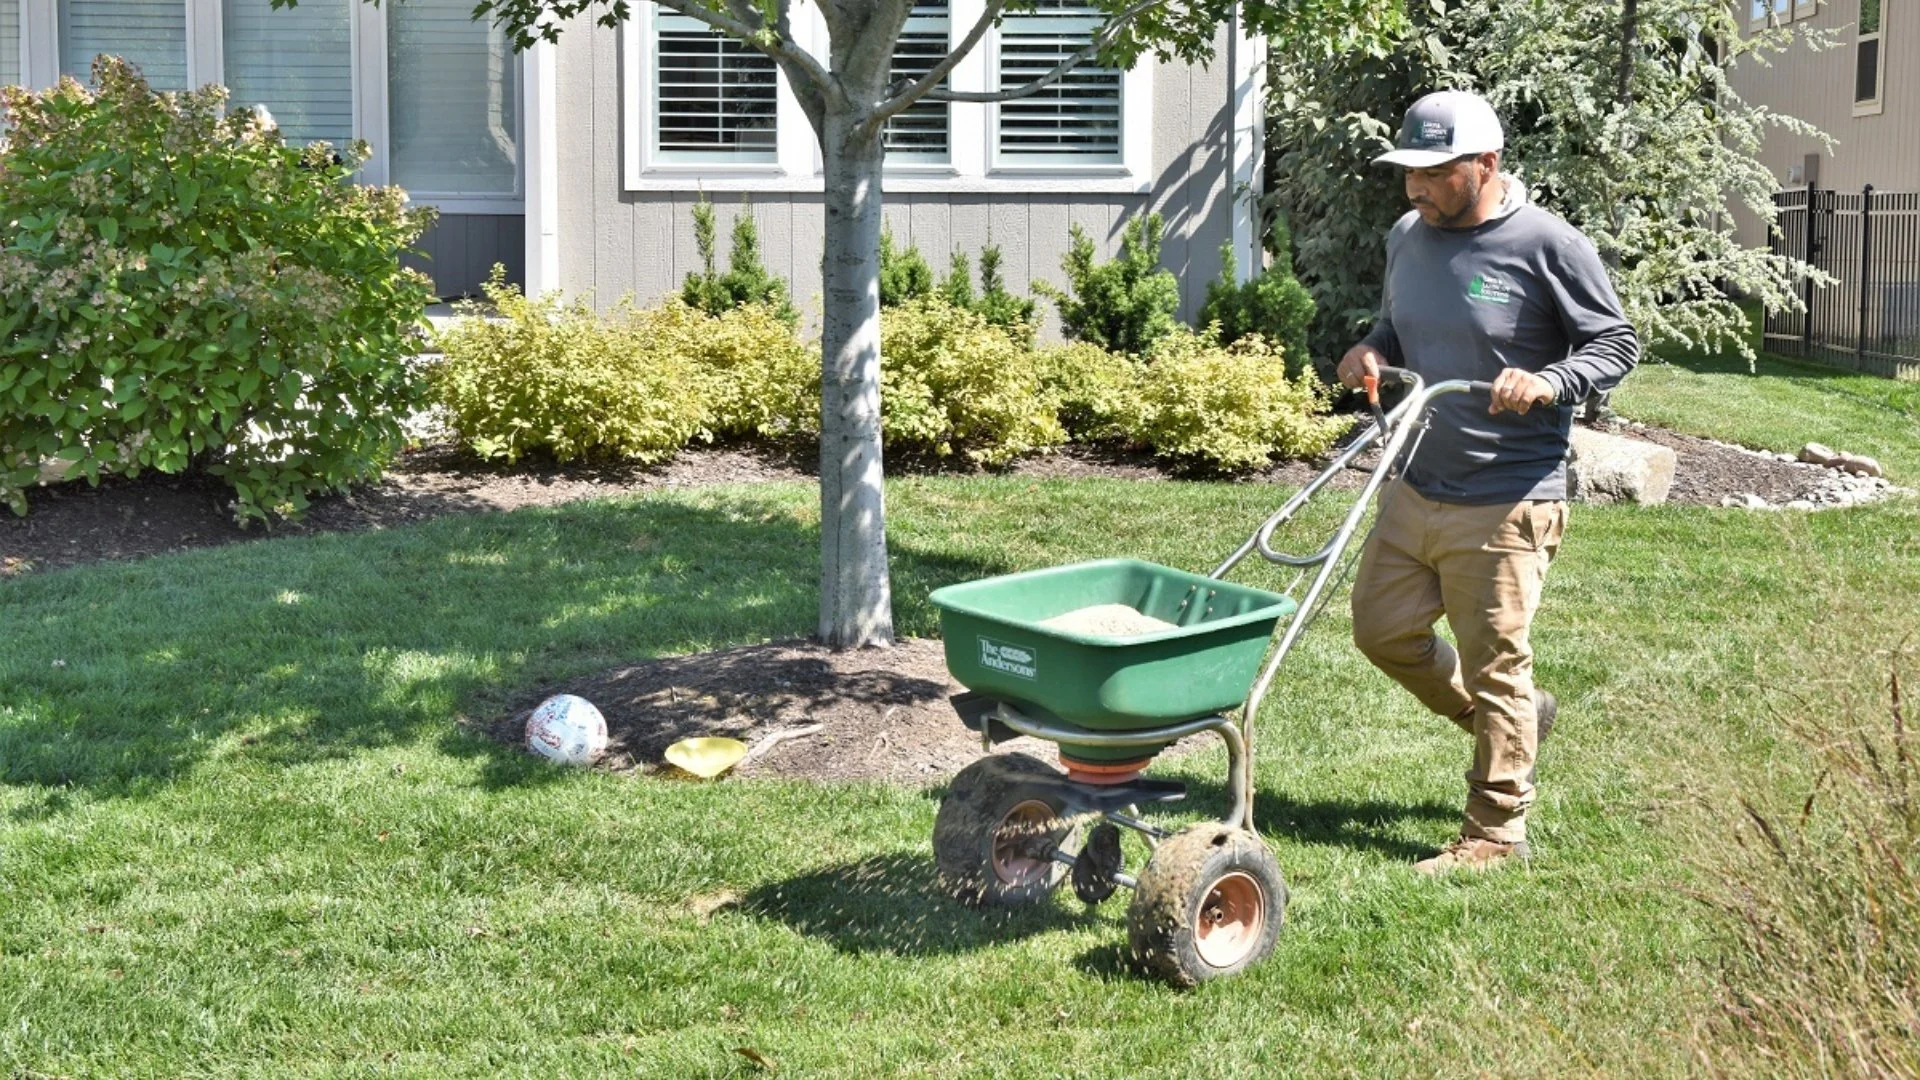 Pre-Emergent Weed Control Should Be on Your Spring Lawn Care To-Do List!